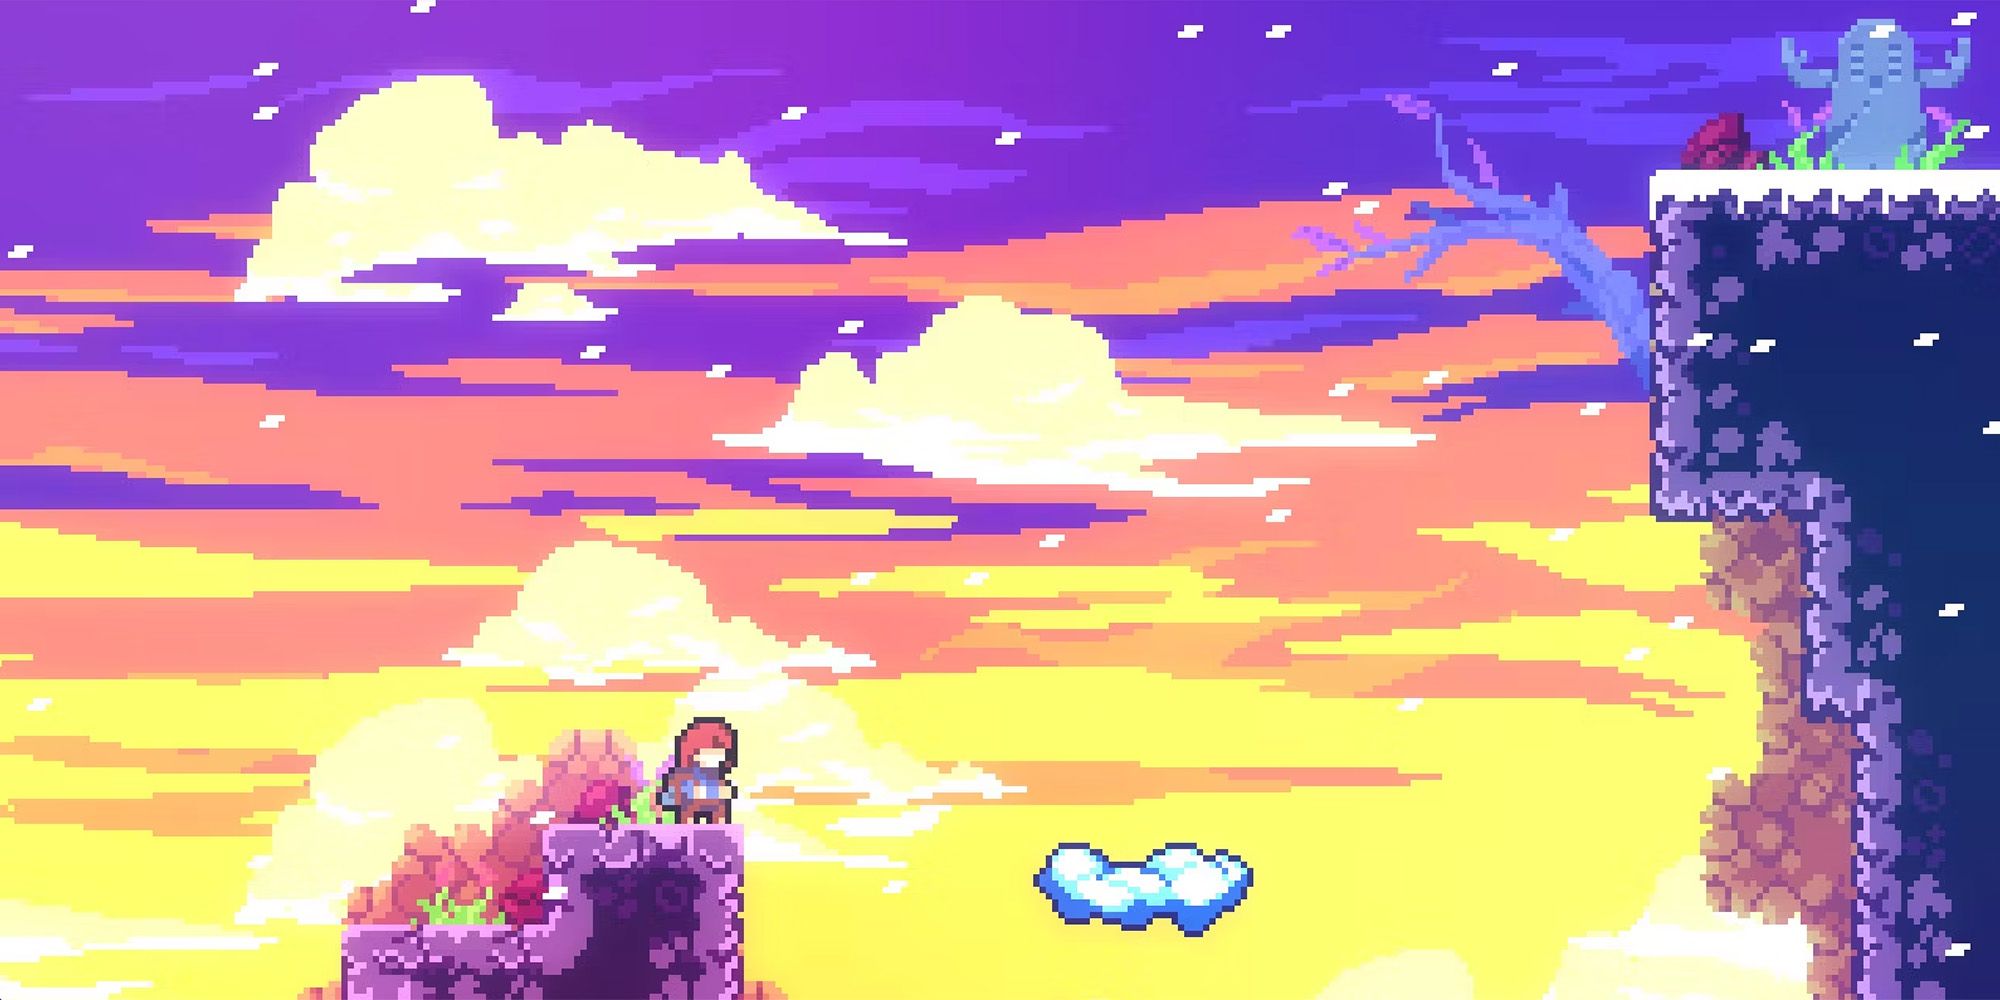 Celeste - Madeline Looking Over A Cliff During A Sunset